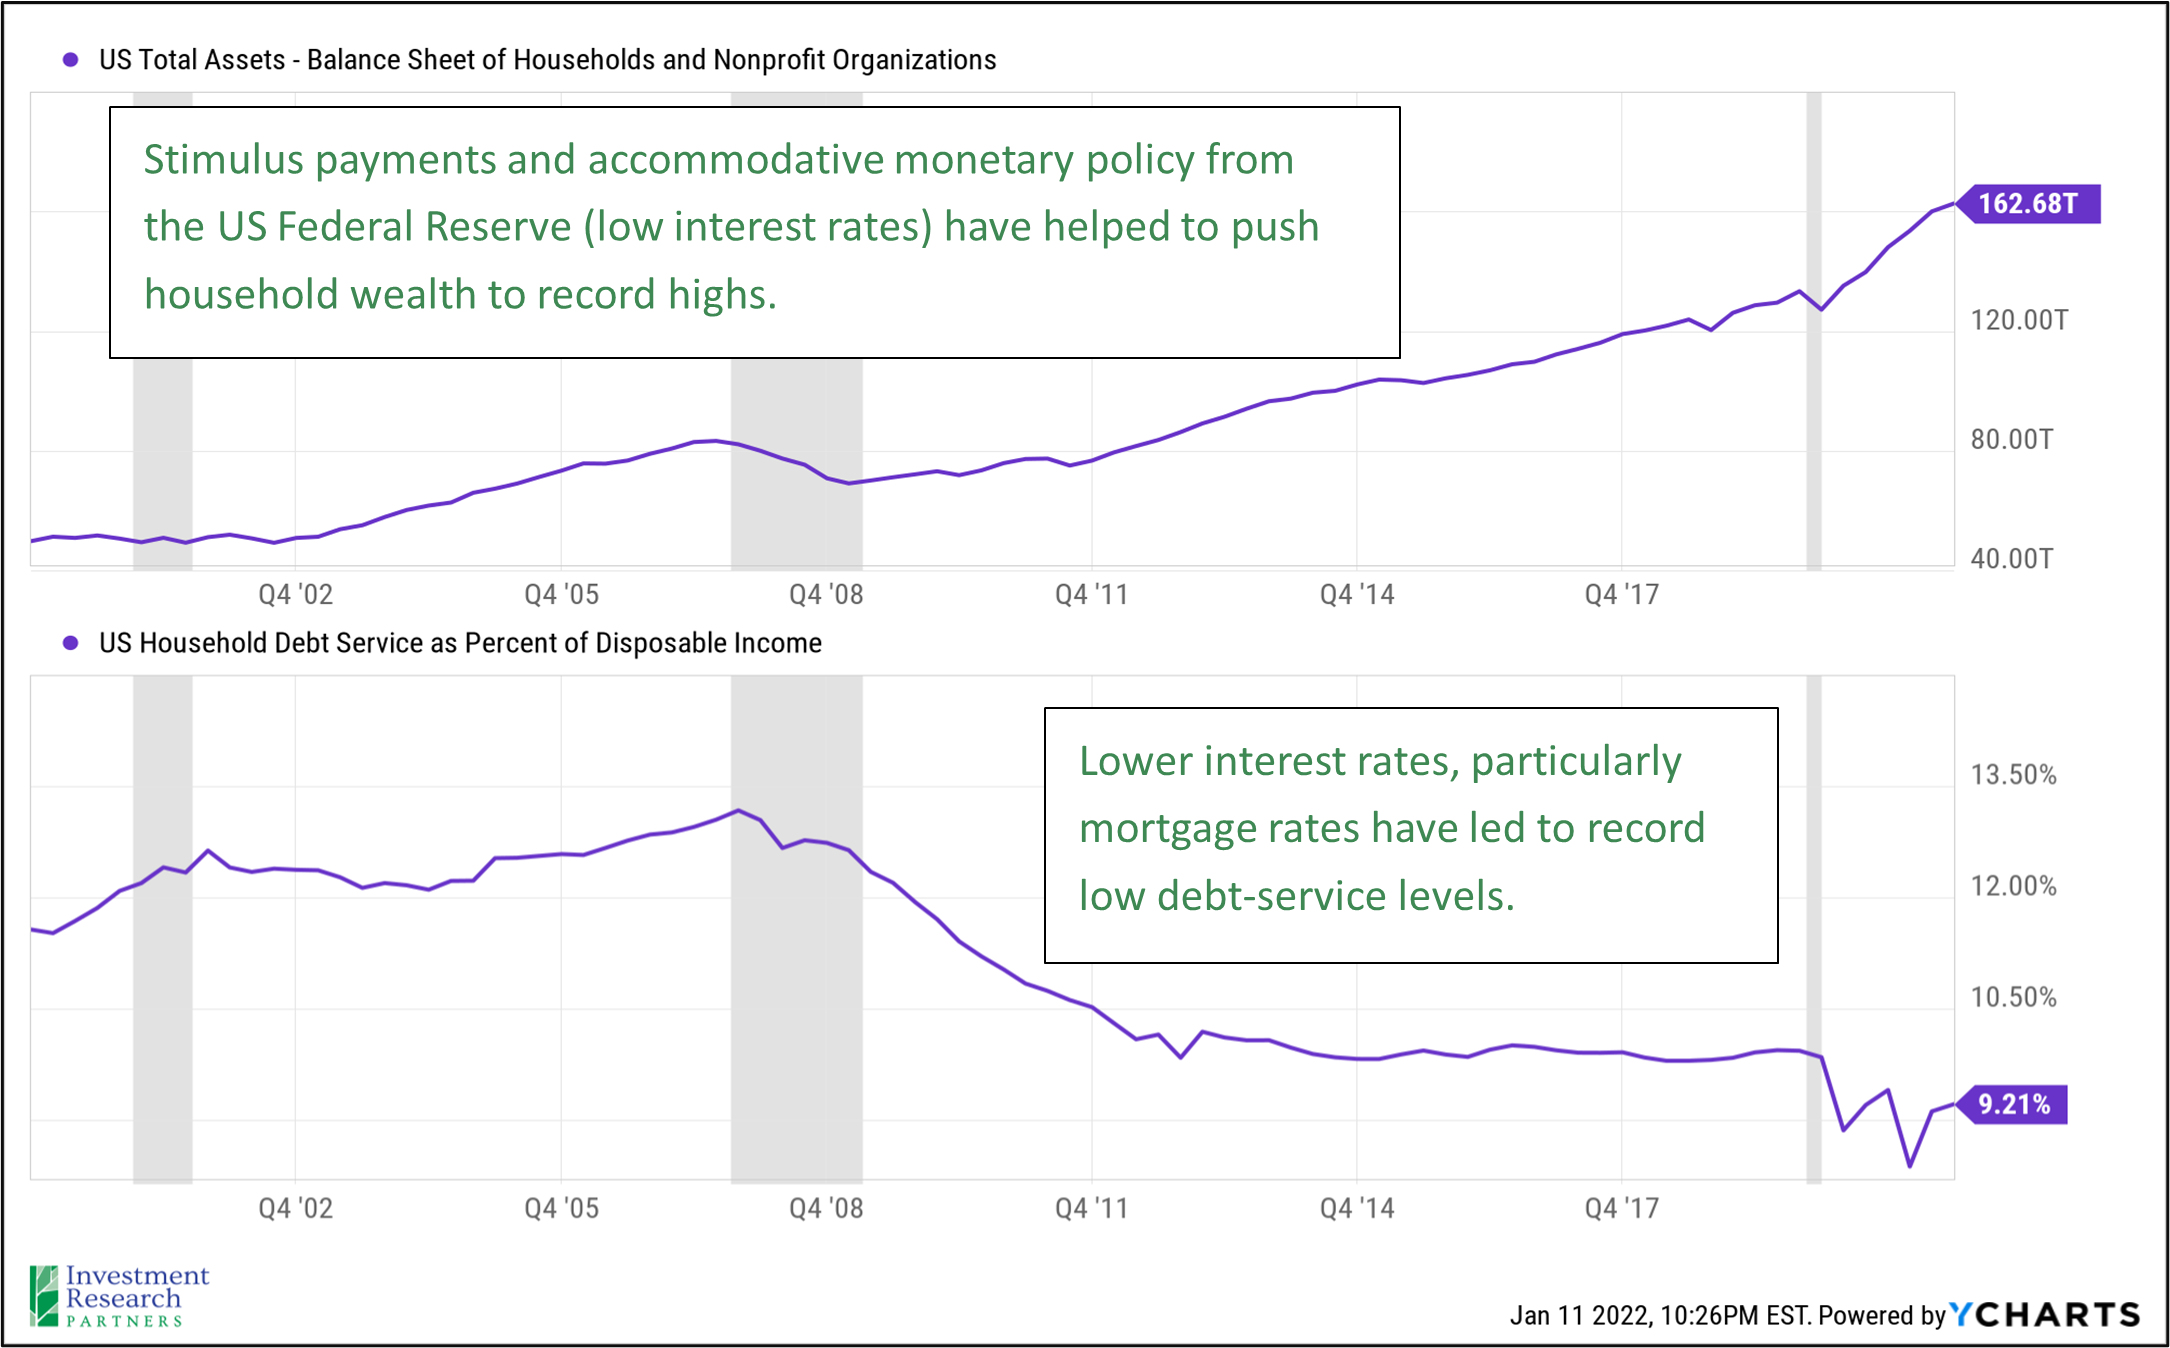 Line graph depicting US Total Assets - Balance Sheet of Household and Nonprofit Organizations since Q4 2002 with text reading: Stimulus payments and accommodative monetary policy from the US Federal Reserve (low interest rates) have helped to push household wealth to record highs.; and a line graph depicting US Household Debt Service as a Percent of Disposable Income since Q4 2002 with text reading: Lower interest rates, particularly mortgage rates have led to record low debt-service levels.